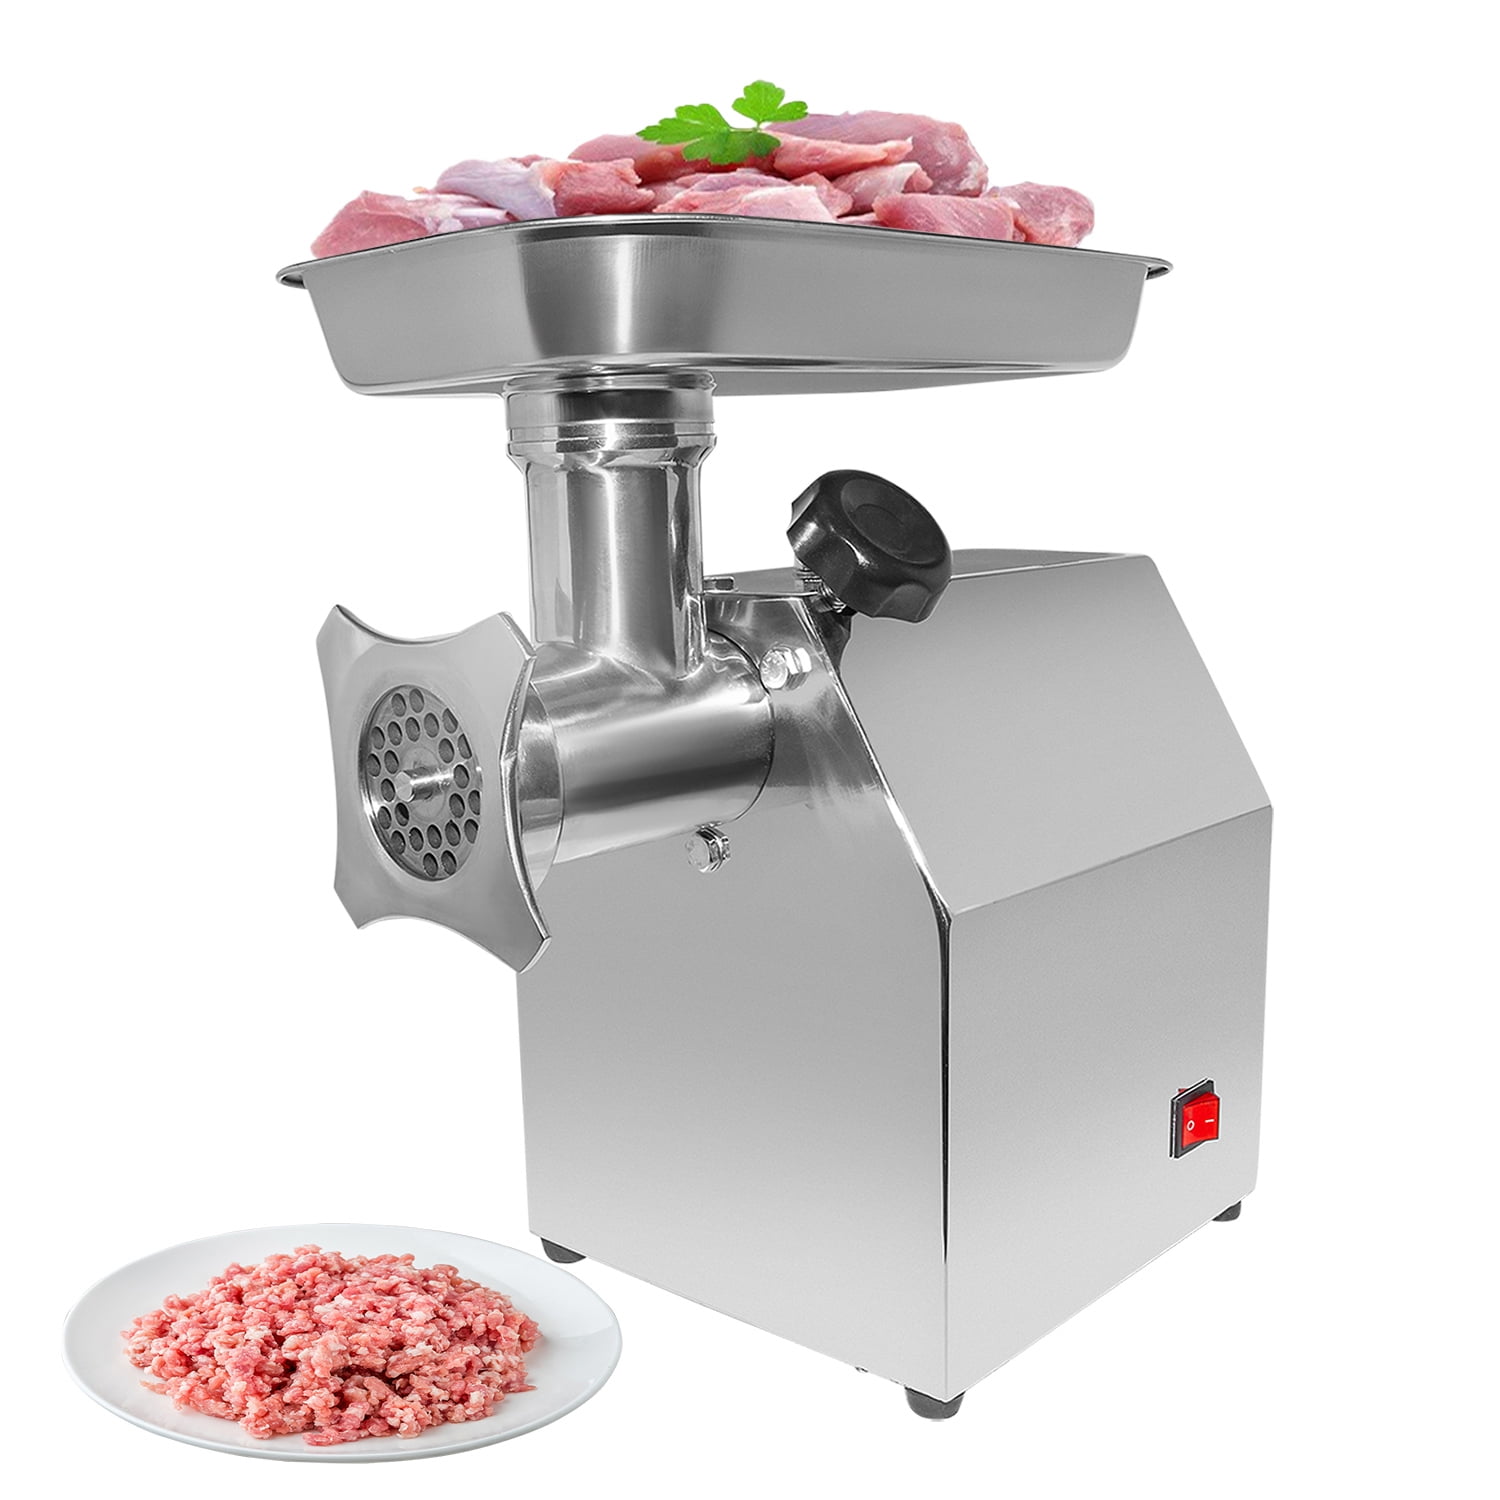 Stainless Steel Commercial Meat Grinder #12 850W 190R/Min Electric Industrial 